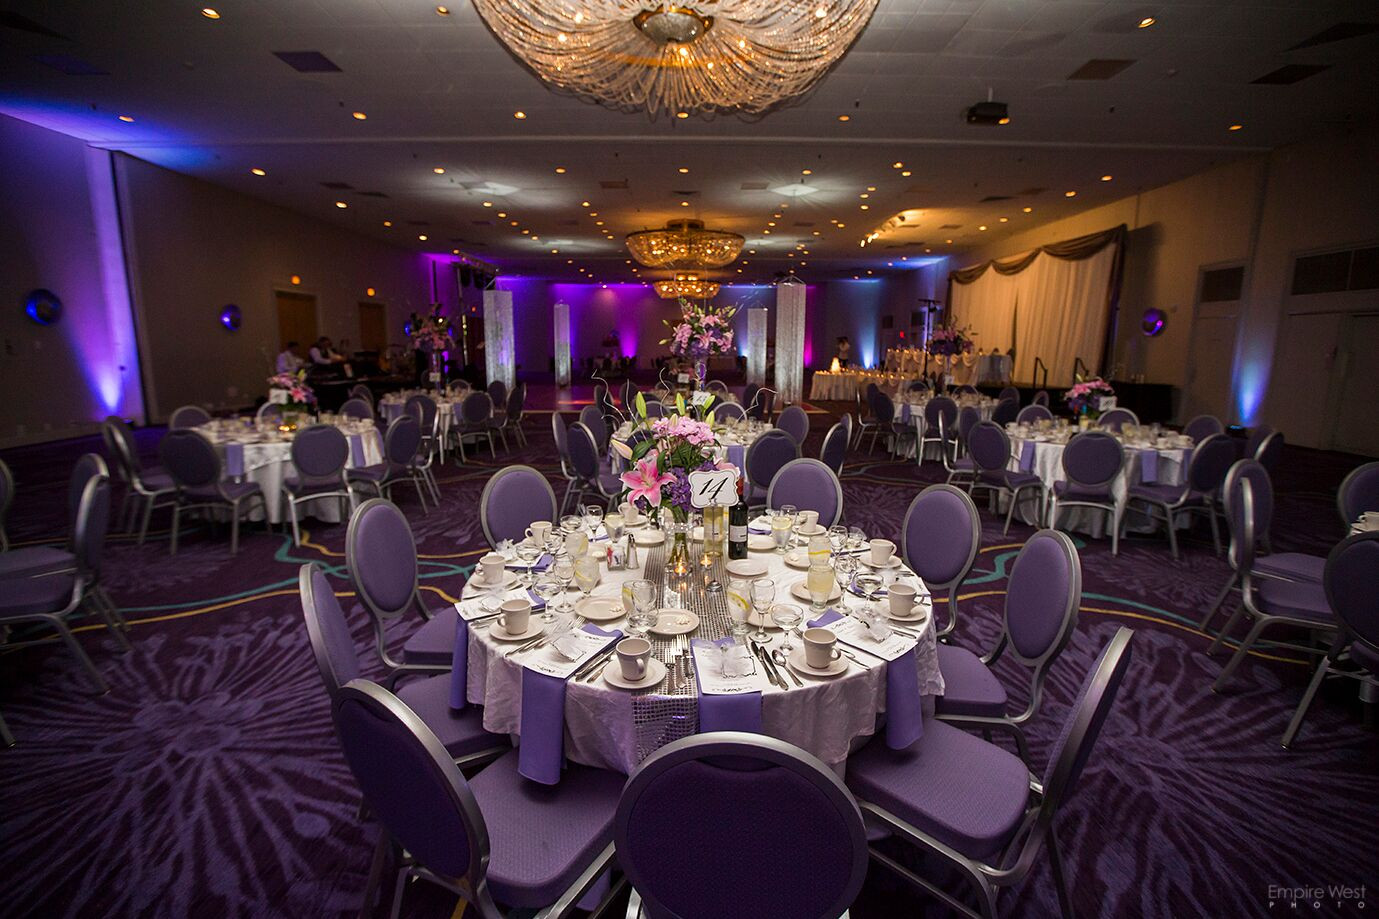  Best Wedding Venues Rochester Ny of the decade The ultimate guide 